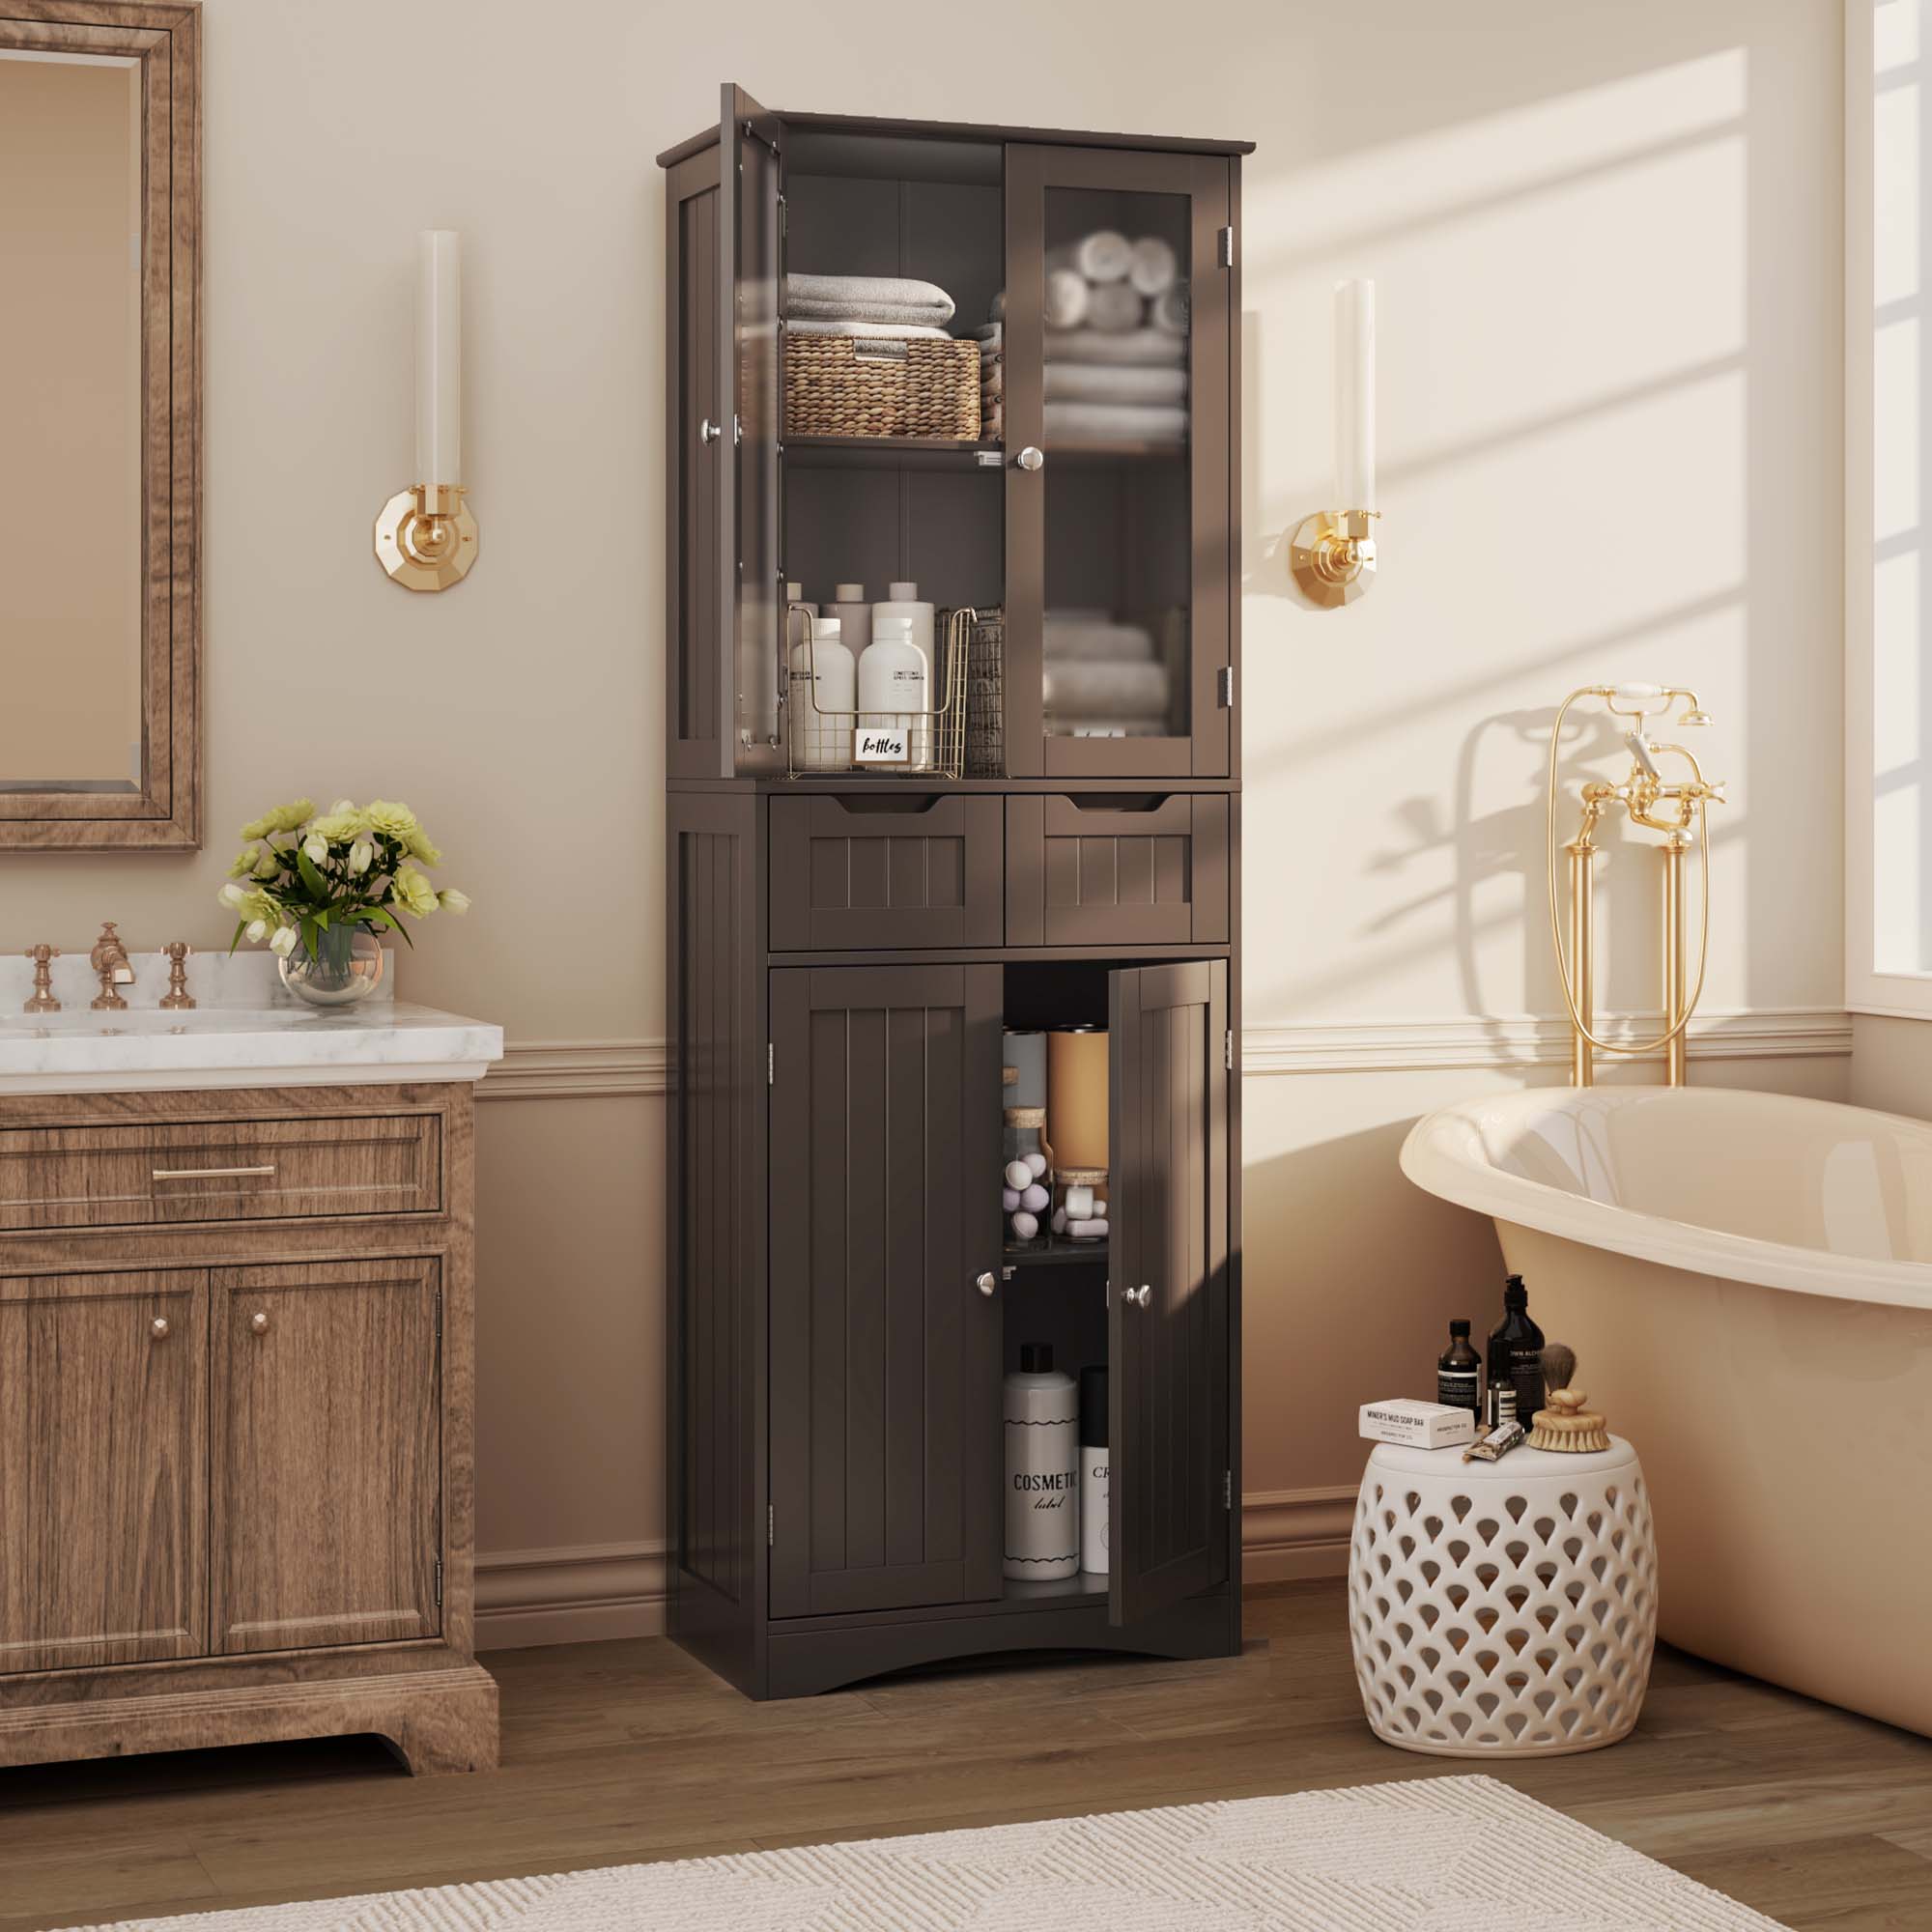 Gizoon AP33 66.9'' H Large Modern Tall Storage Cabinet with 2 Drawers, Freestanding Pantry and Glass Doors